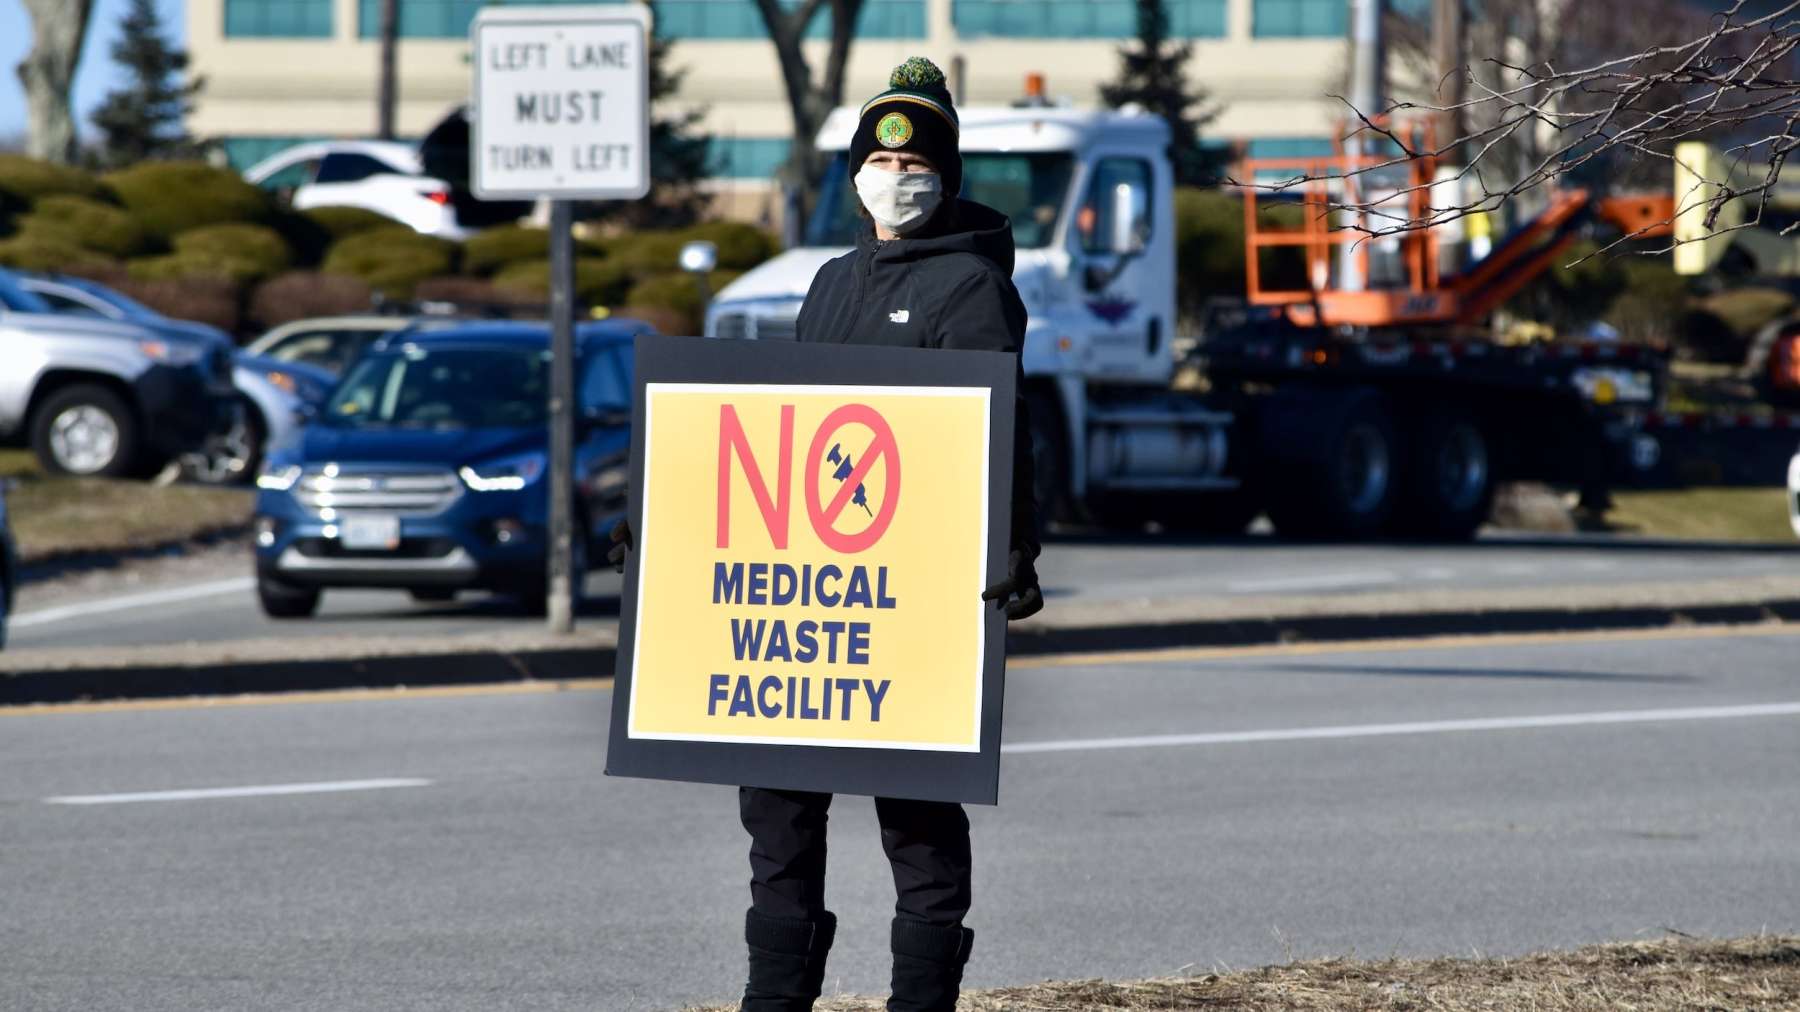 Rhode Island News: Attorney General Neronha expresses concerns over West Warwick Medrecycler pyrolysis facility